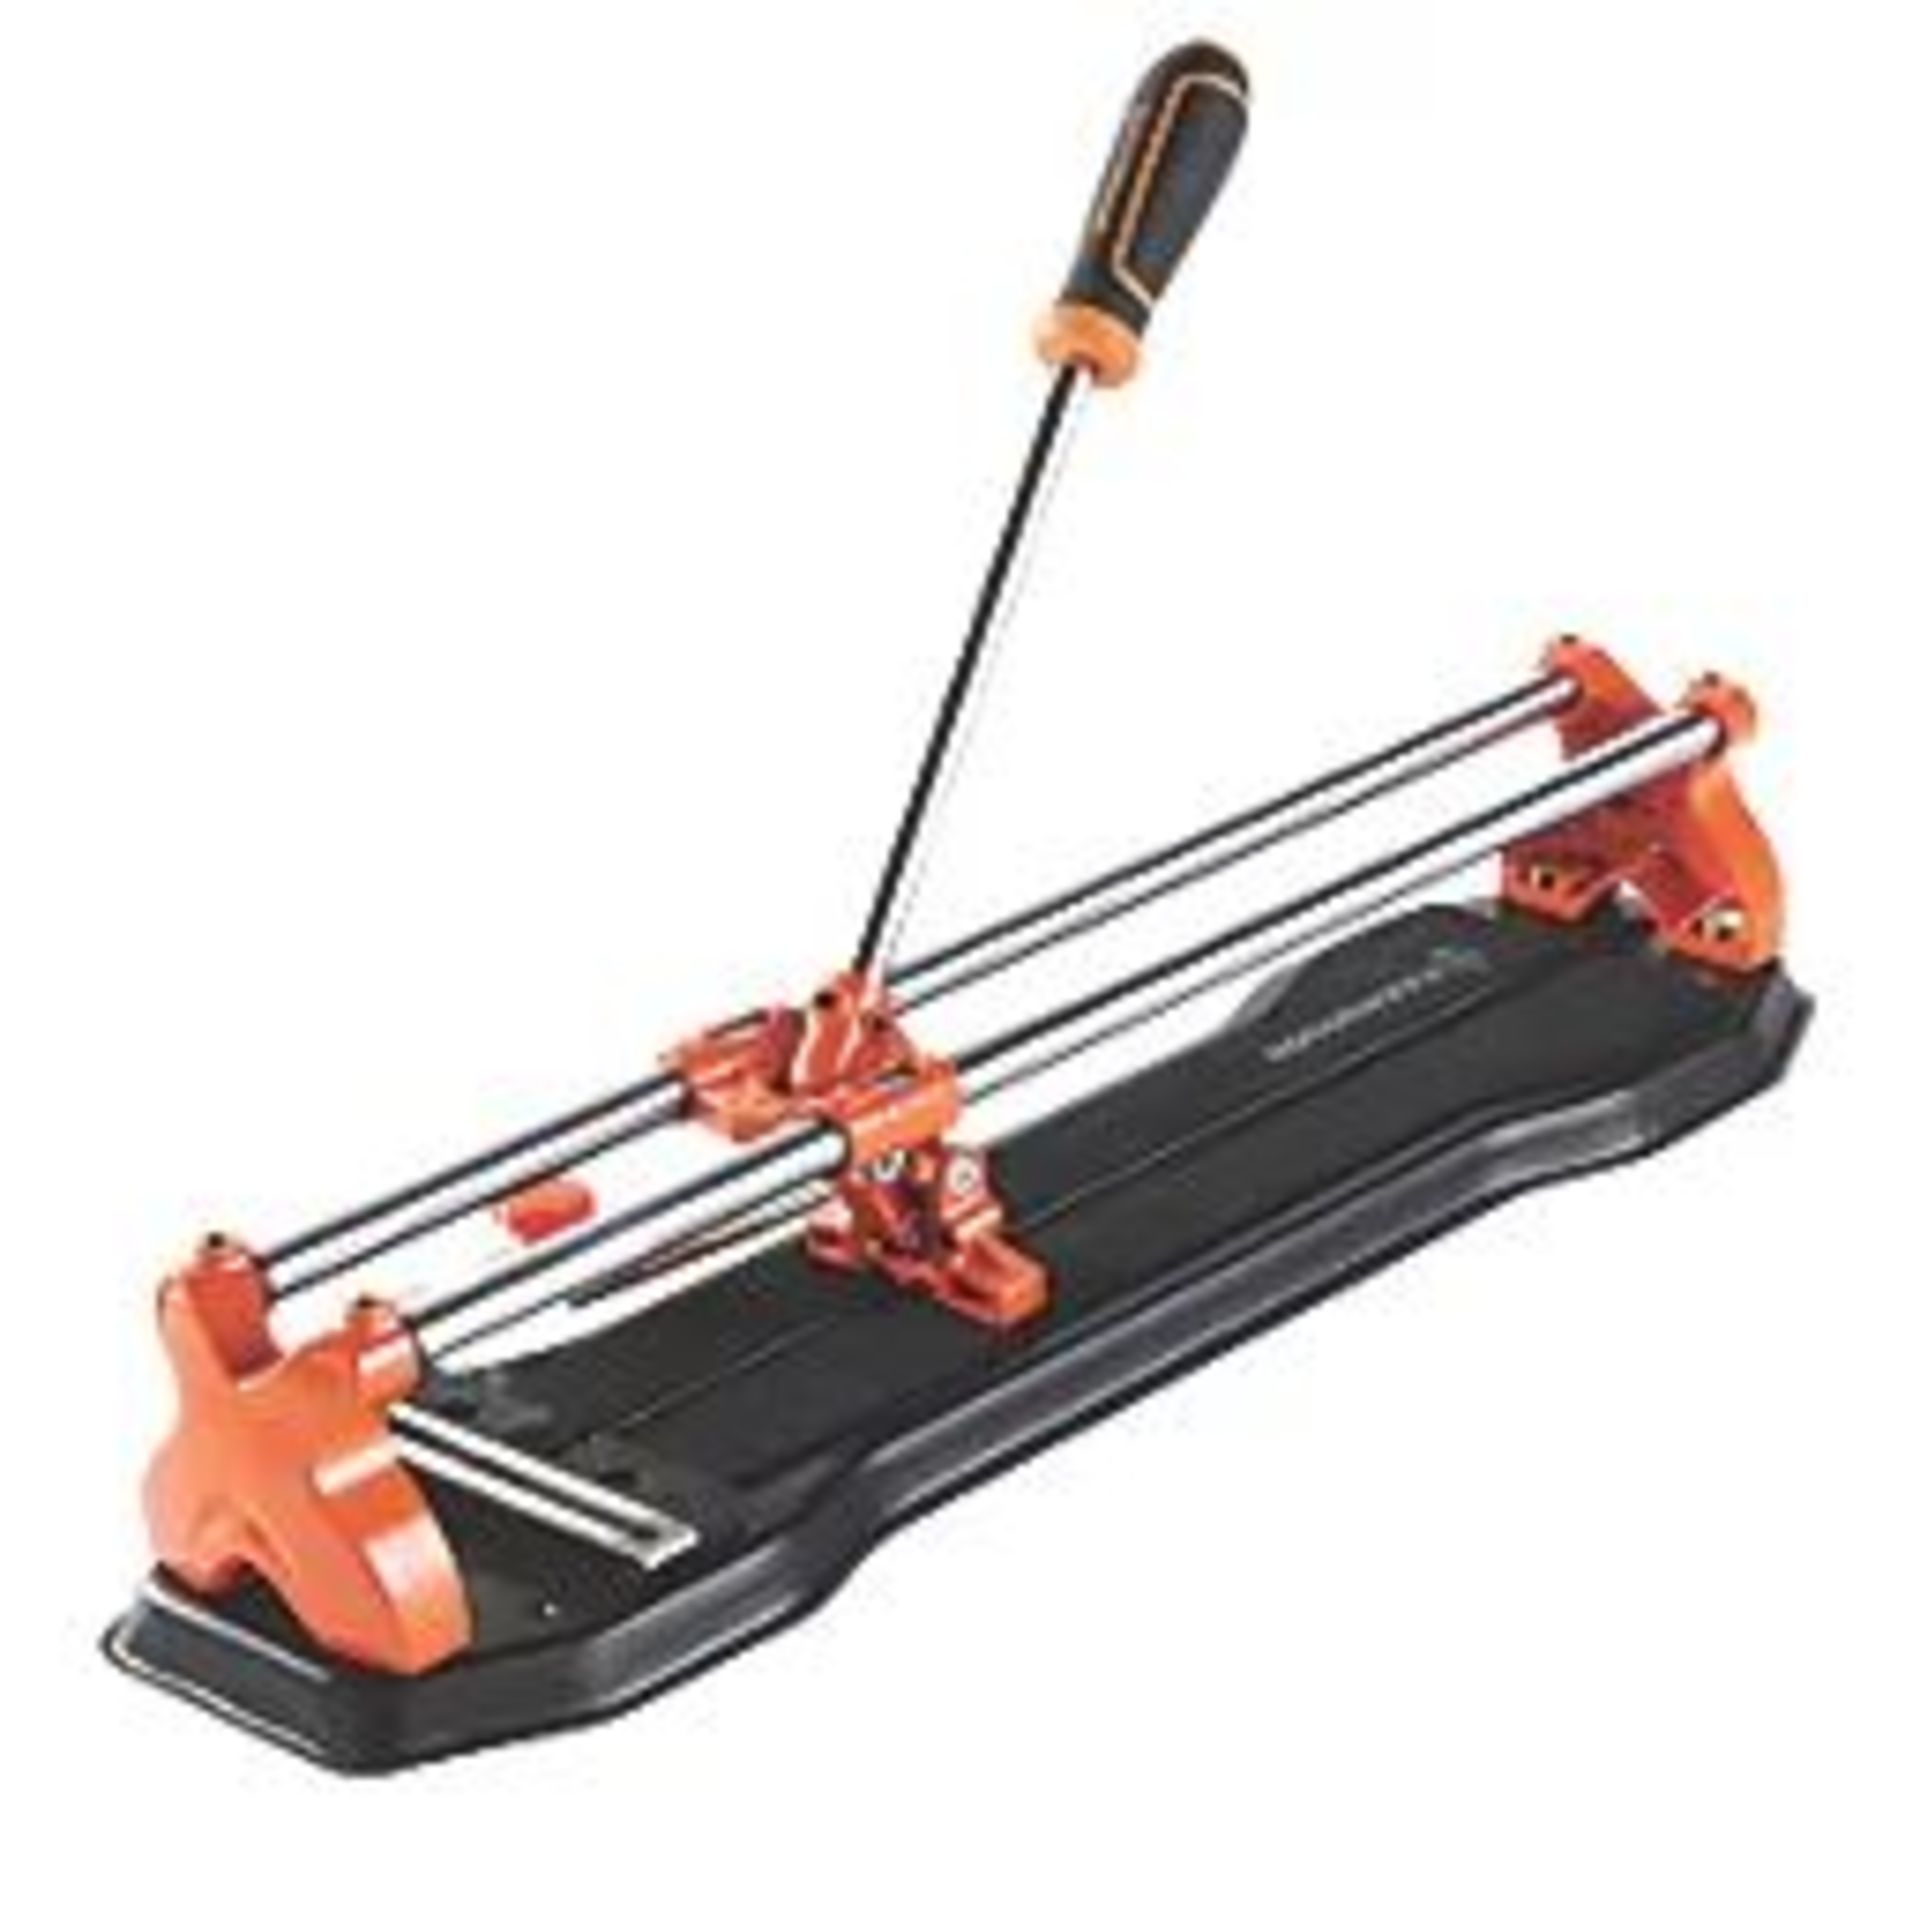 dMAGNUSSON TILE CUTTER 430MM. - R14.6. High performance heavy duty manual tile cutter for cutting